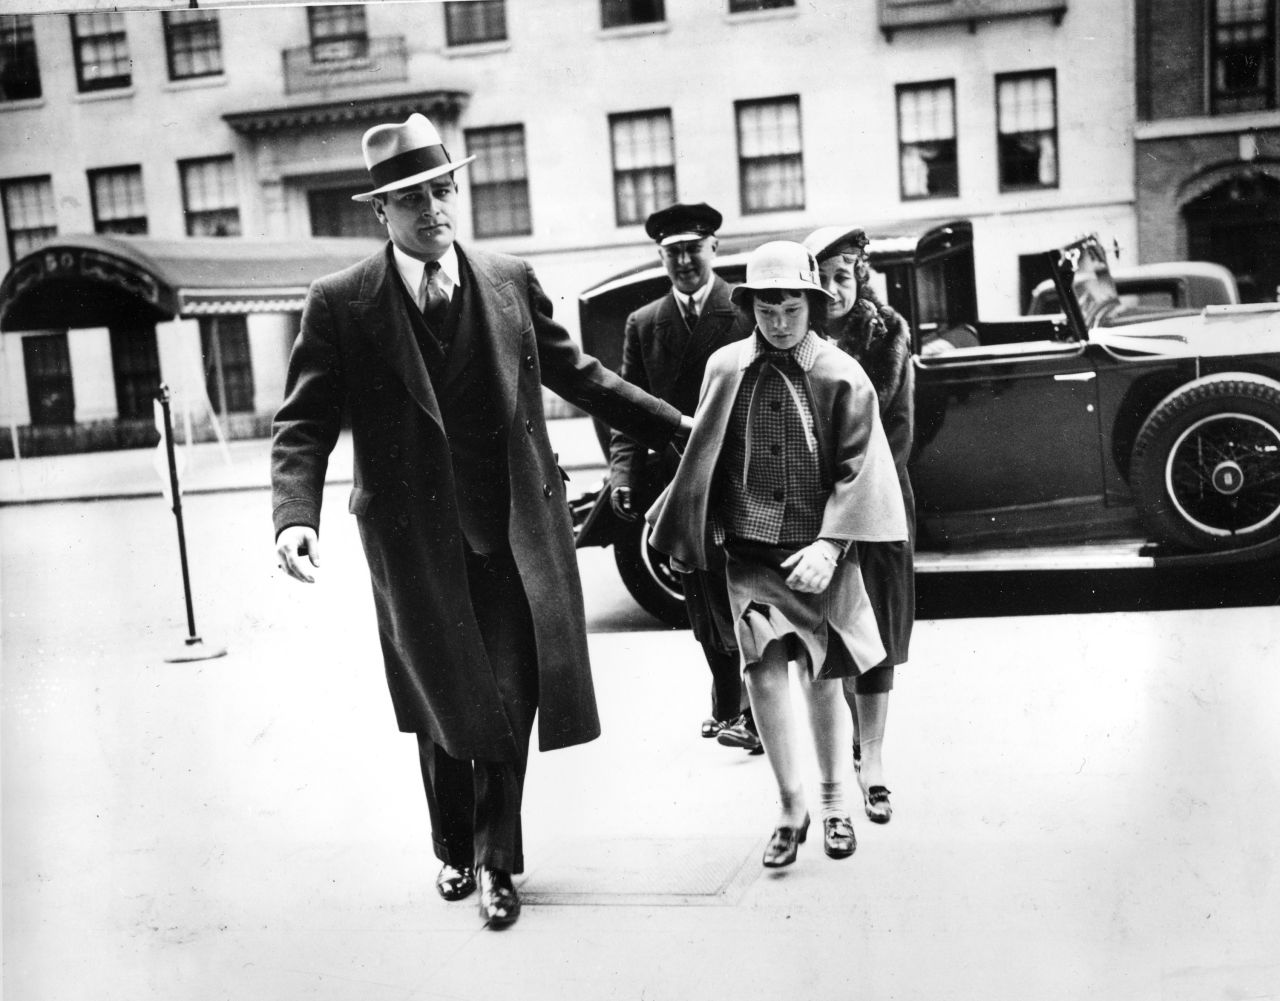 Vanderbilt is accompanied by a bodyguard, nurse and chauffeur as she enters her mother's Manhattan home for an Easter weekend visit in 1935. Vanderbilt was the focus of media attention at an early age, dubbed "the poor little rich girl" amid an intense custody battle between her mother and her father's enormously wealthy sister, Gertrude Vanderbilt Whitney. Her aunt prevailed in court proceedings.